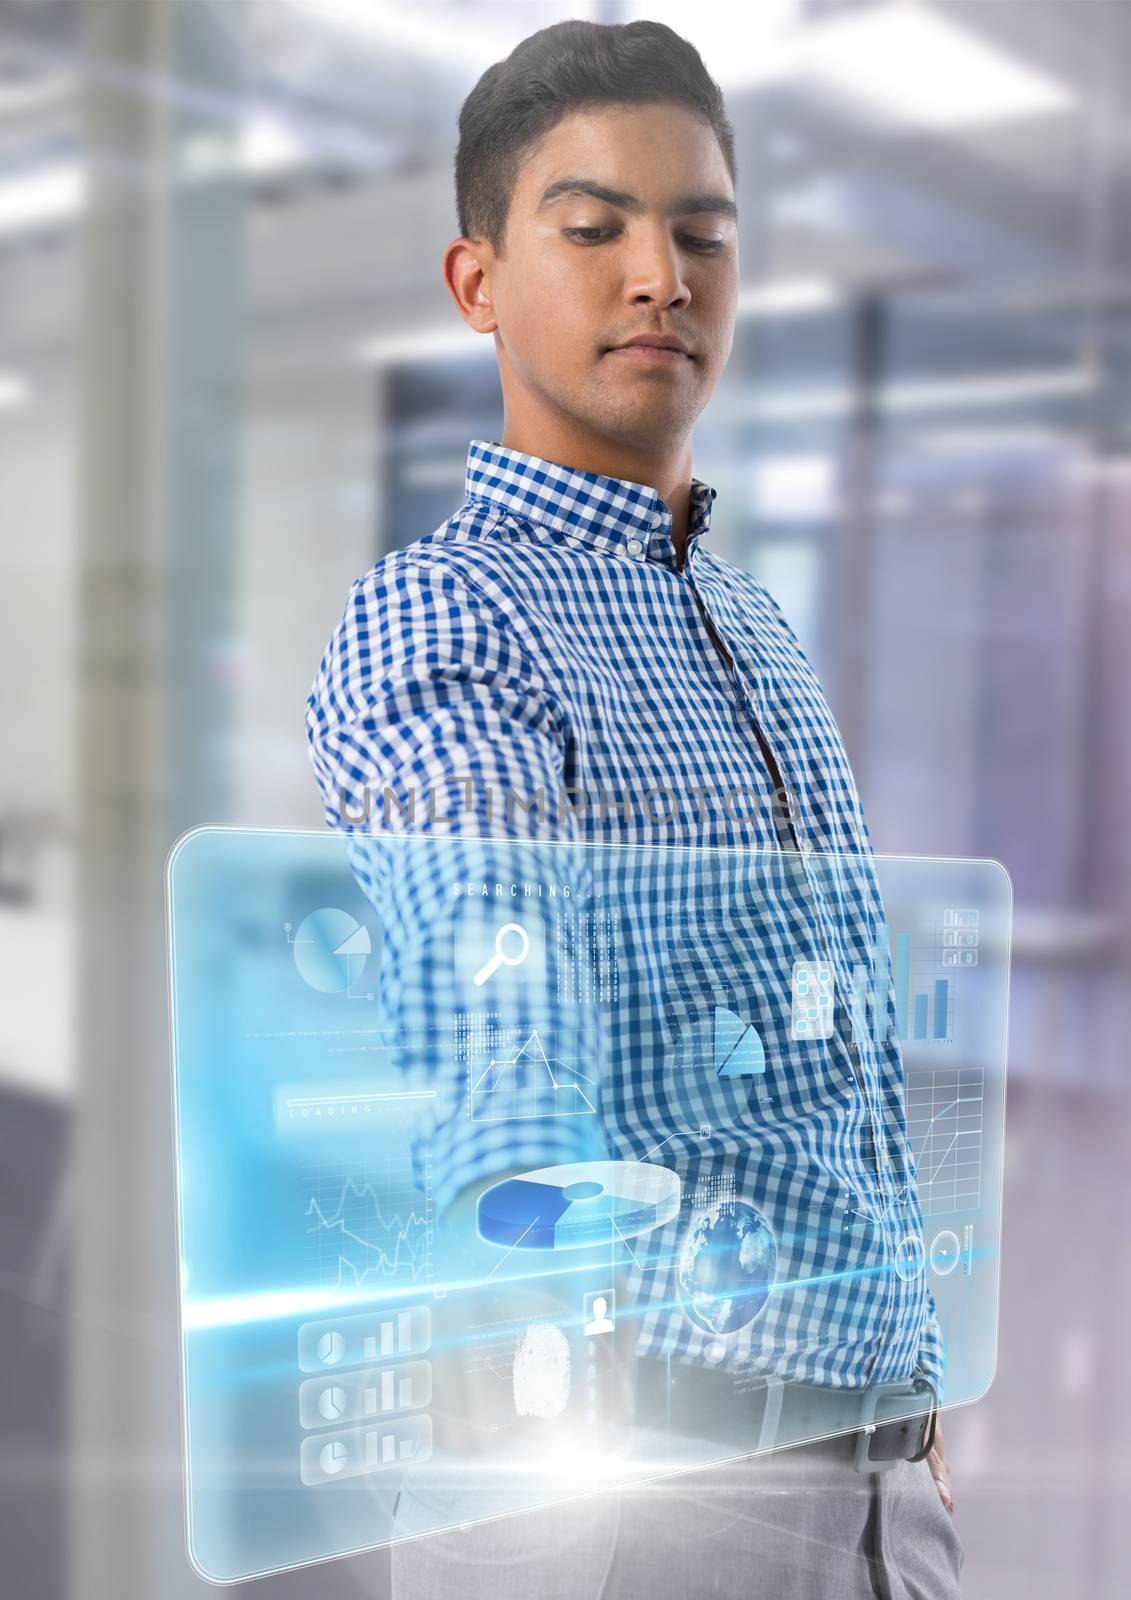 Digital composite of Technology interface and Businessman touching air in front of office